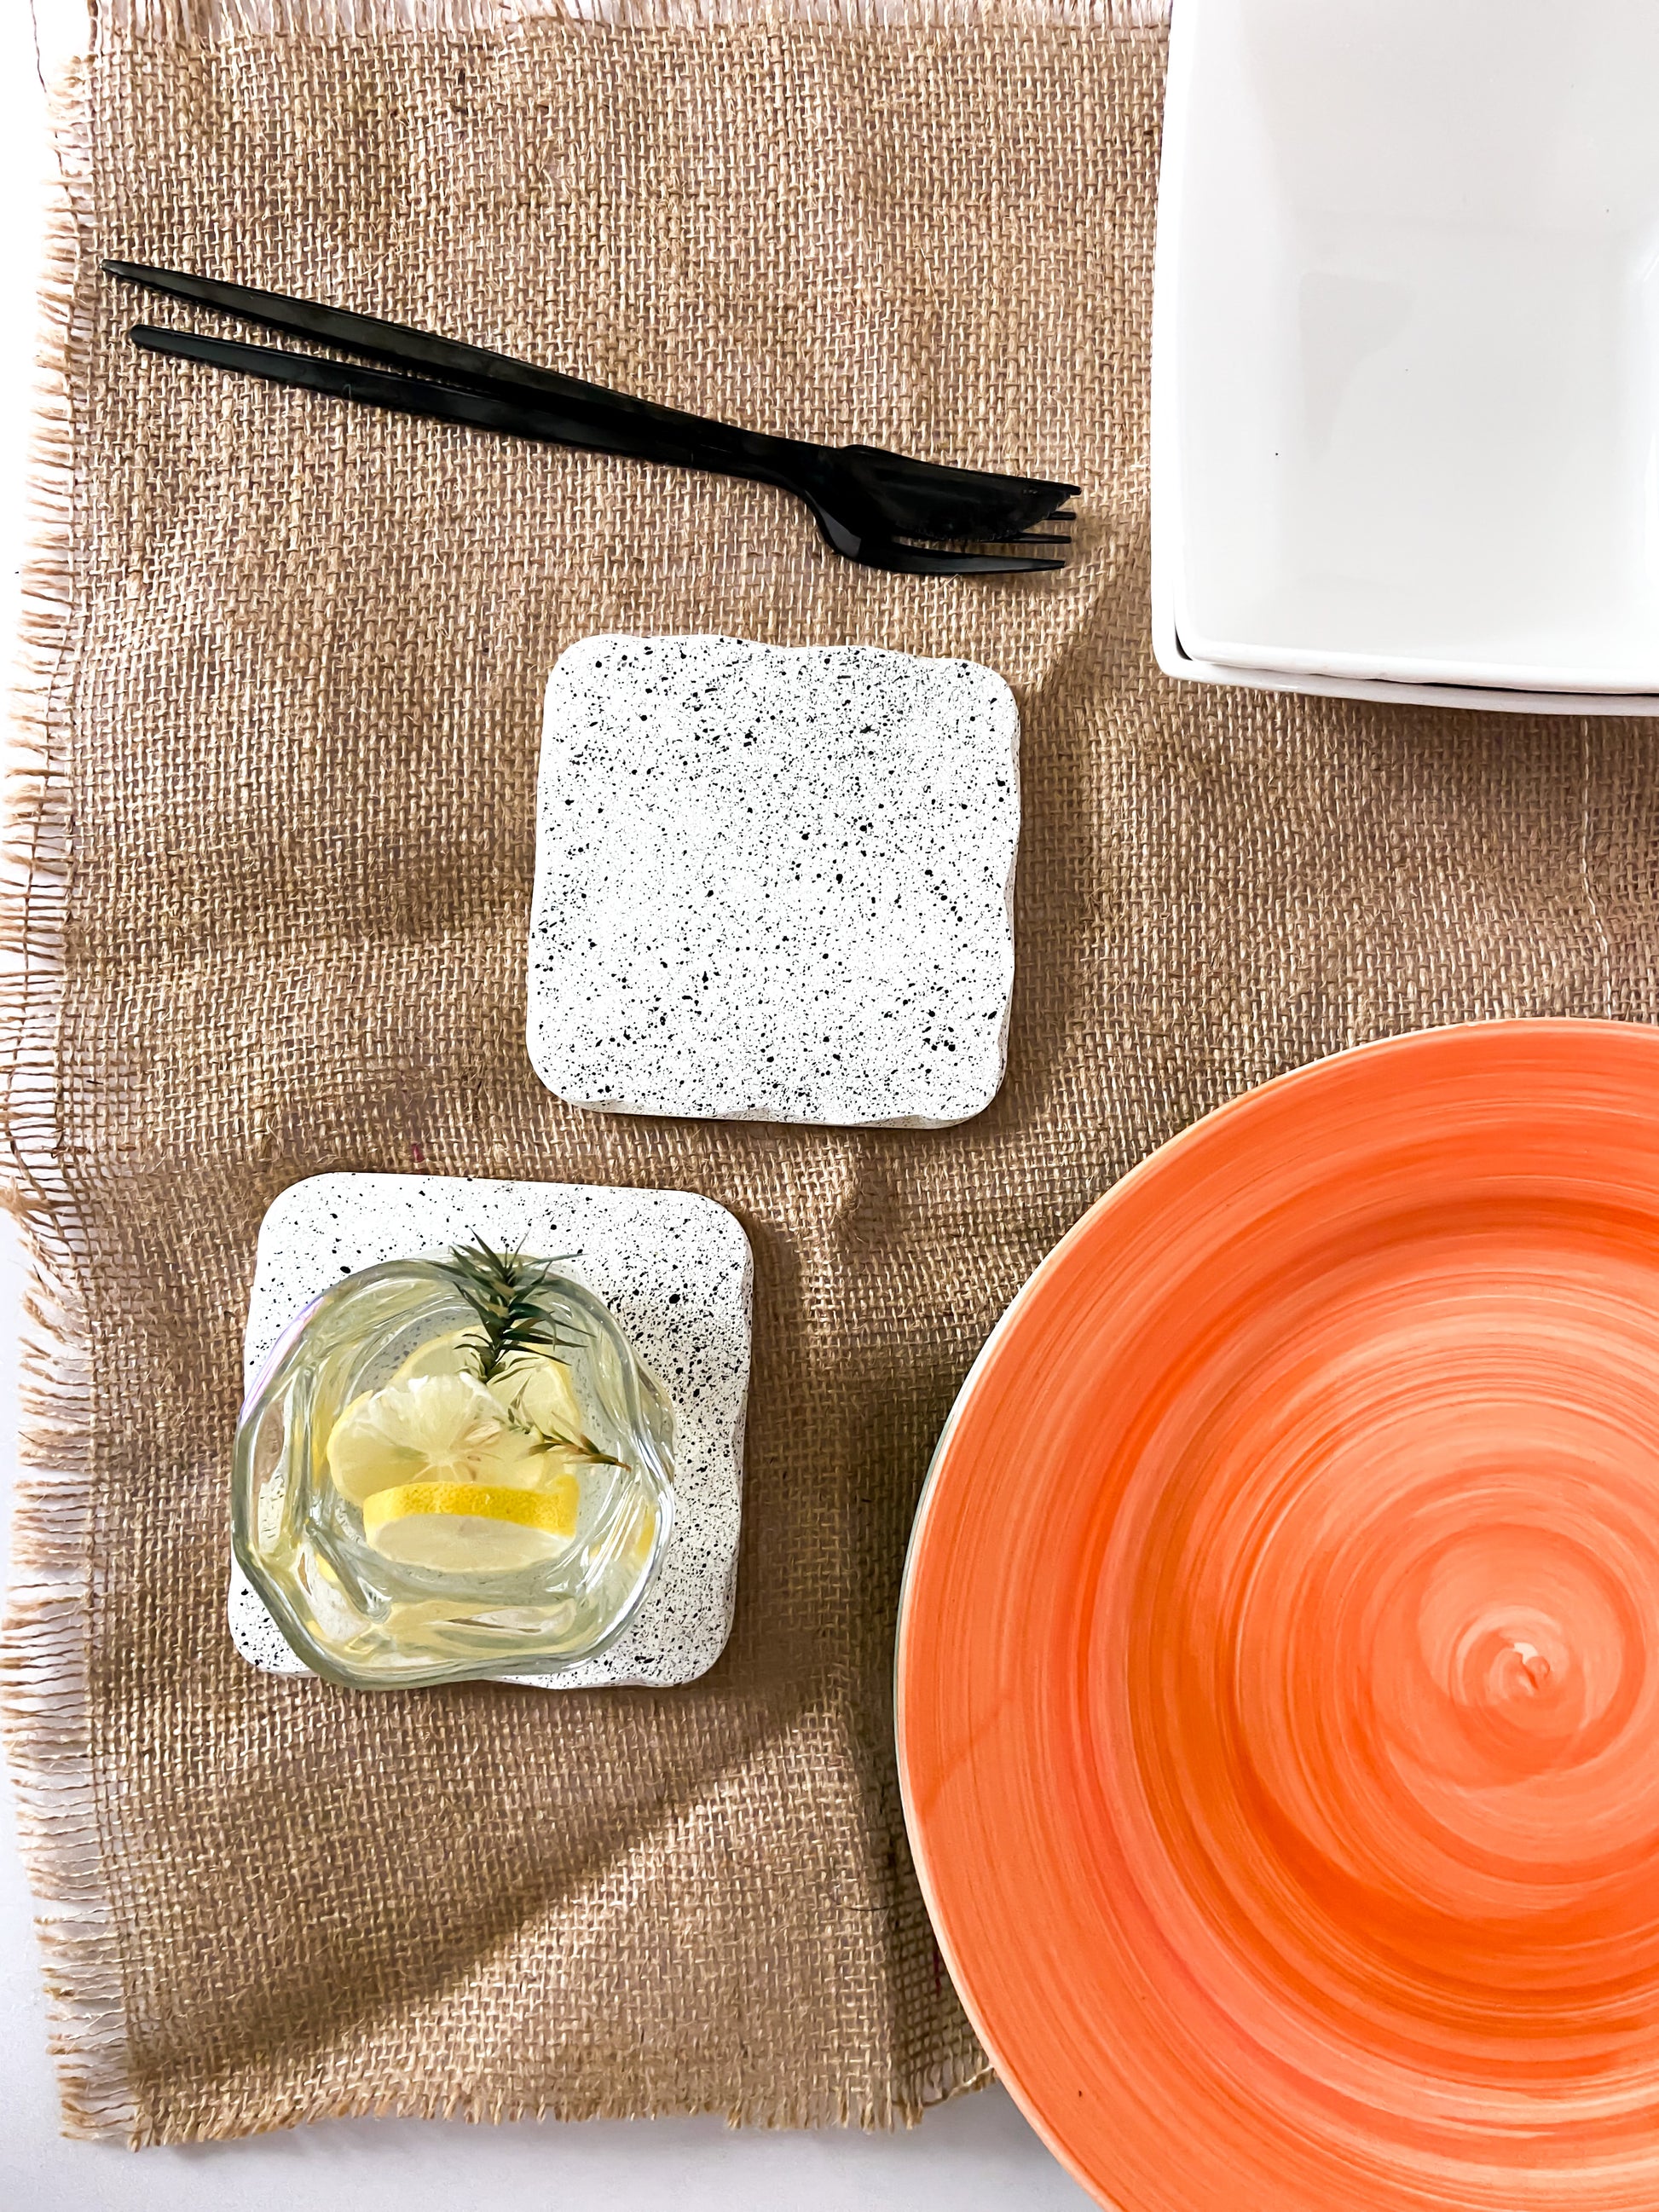 Speckled white concrete coaster set on a burlap table cloth with an orange plate on the right